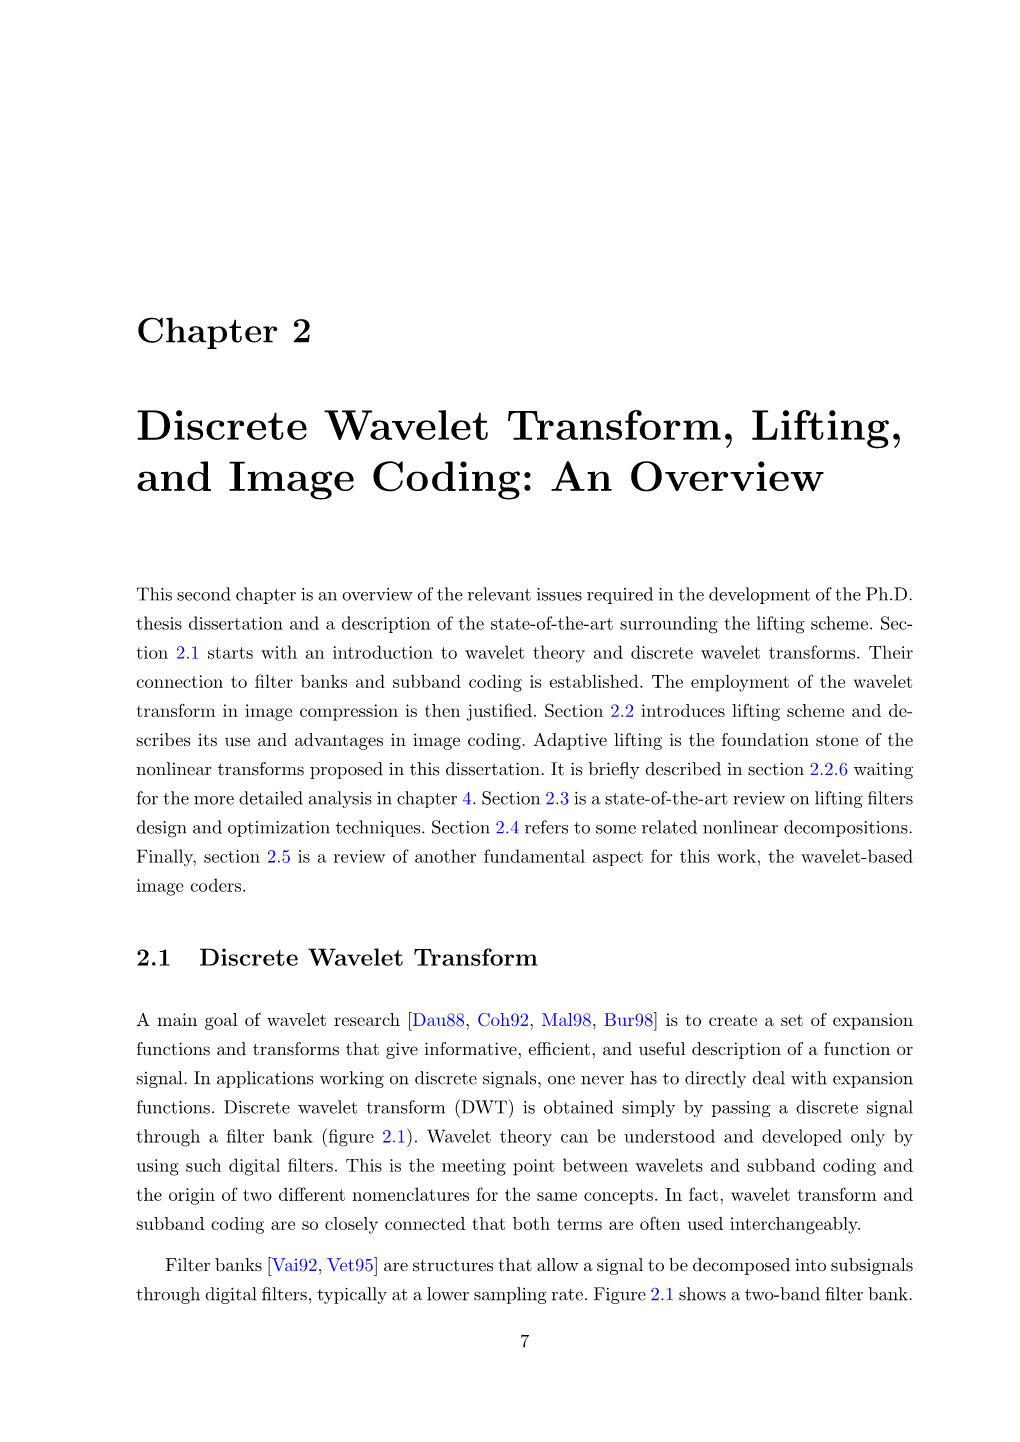 Discrete Wavelet Transform, Lifting, and Image Coding: an Overview